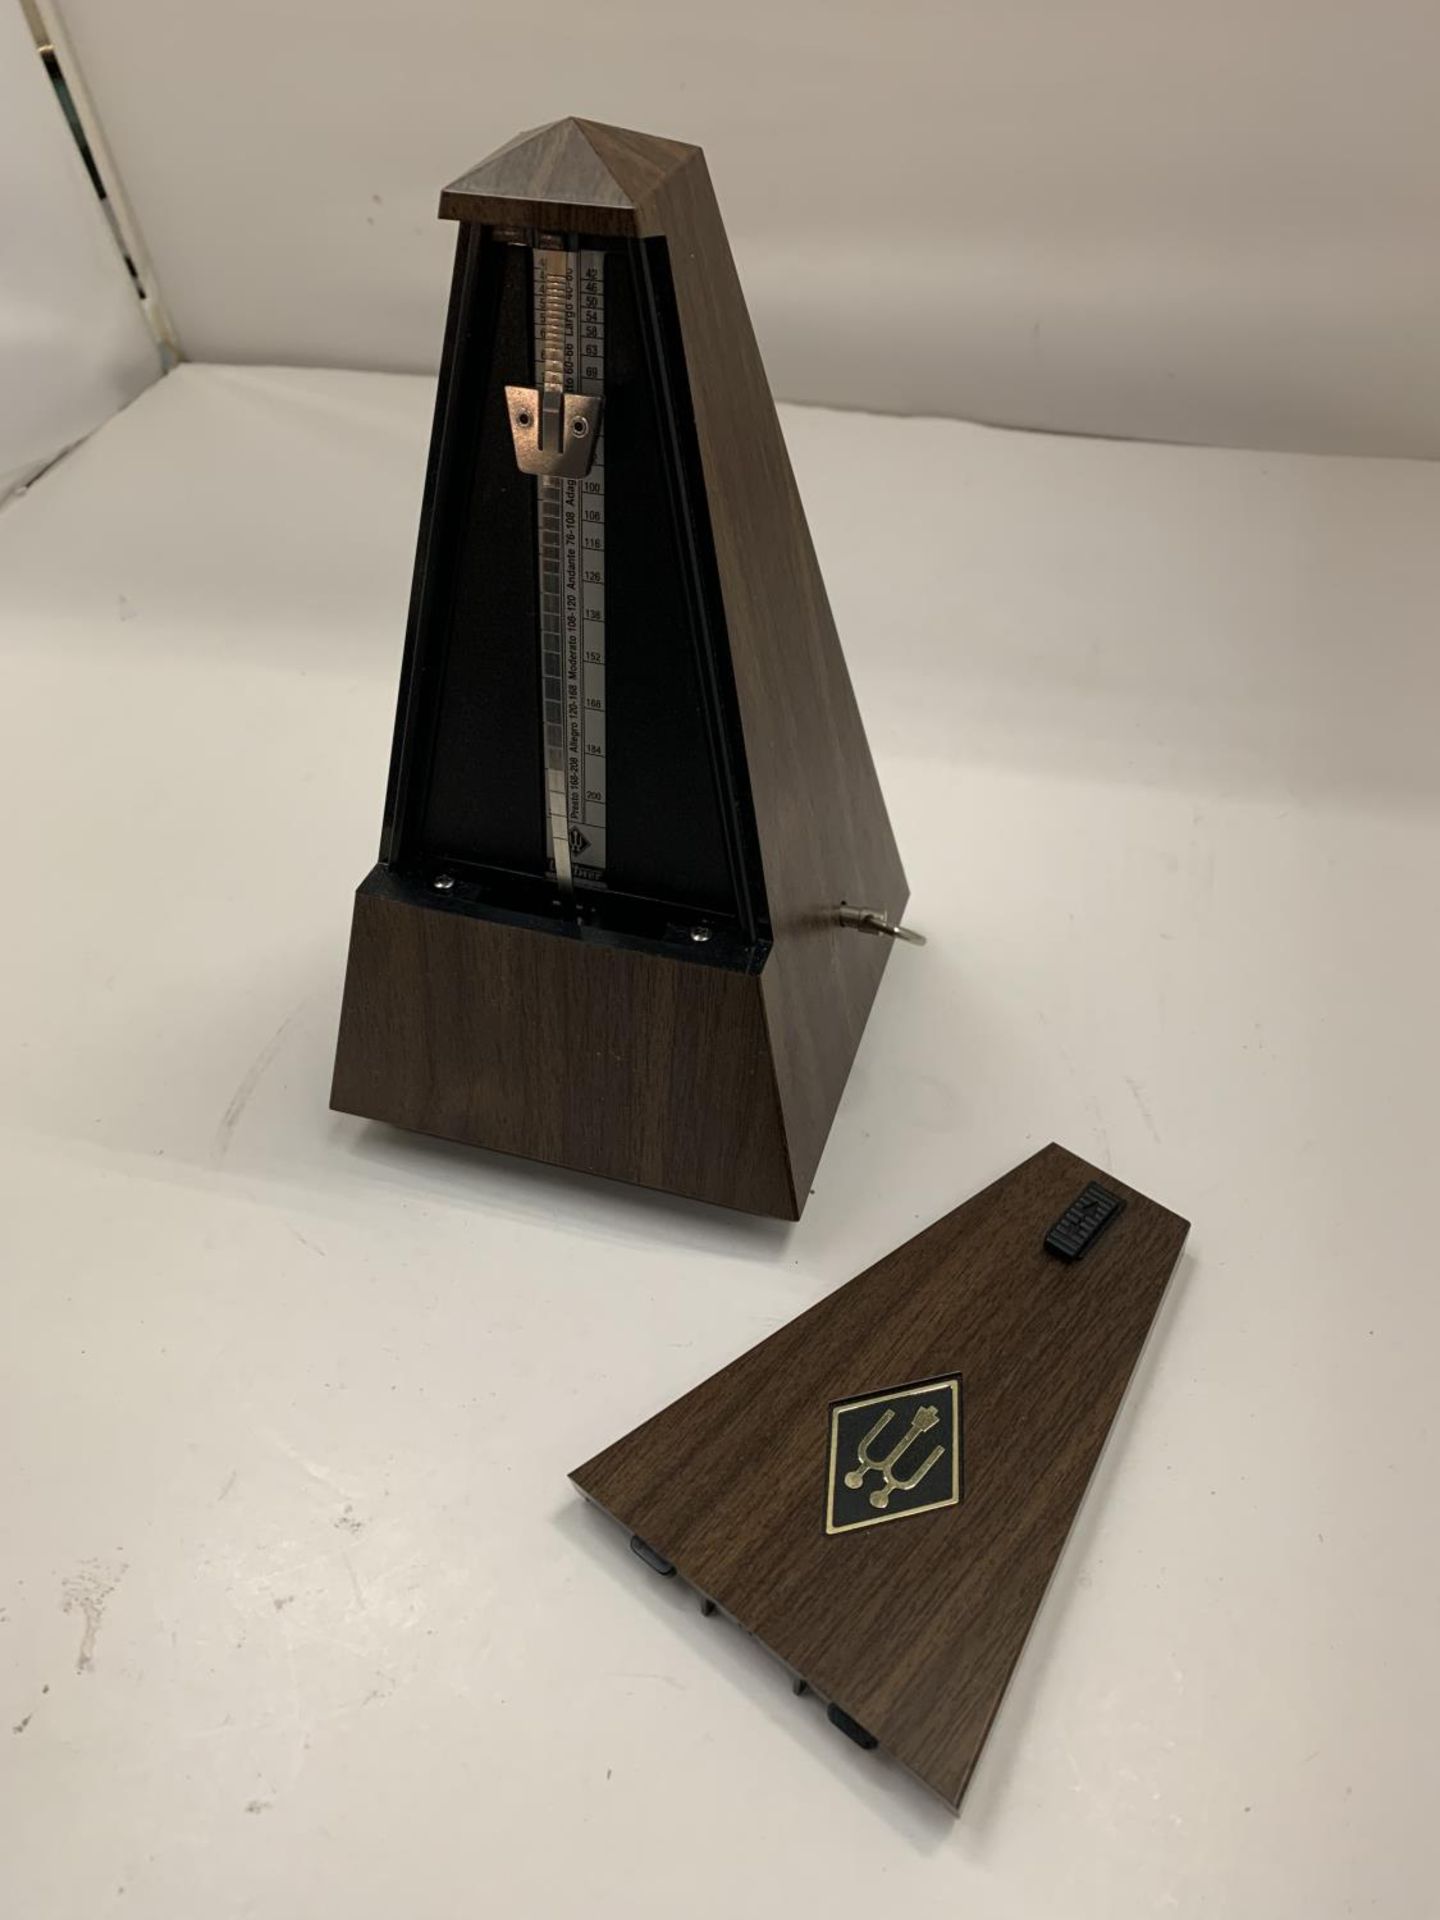 A WITTNER METRONOME - Image 3 of 4